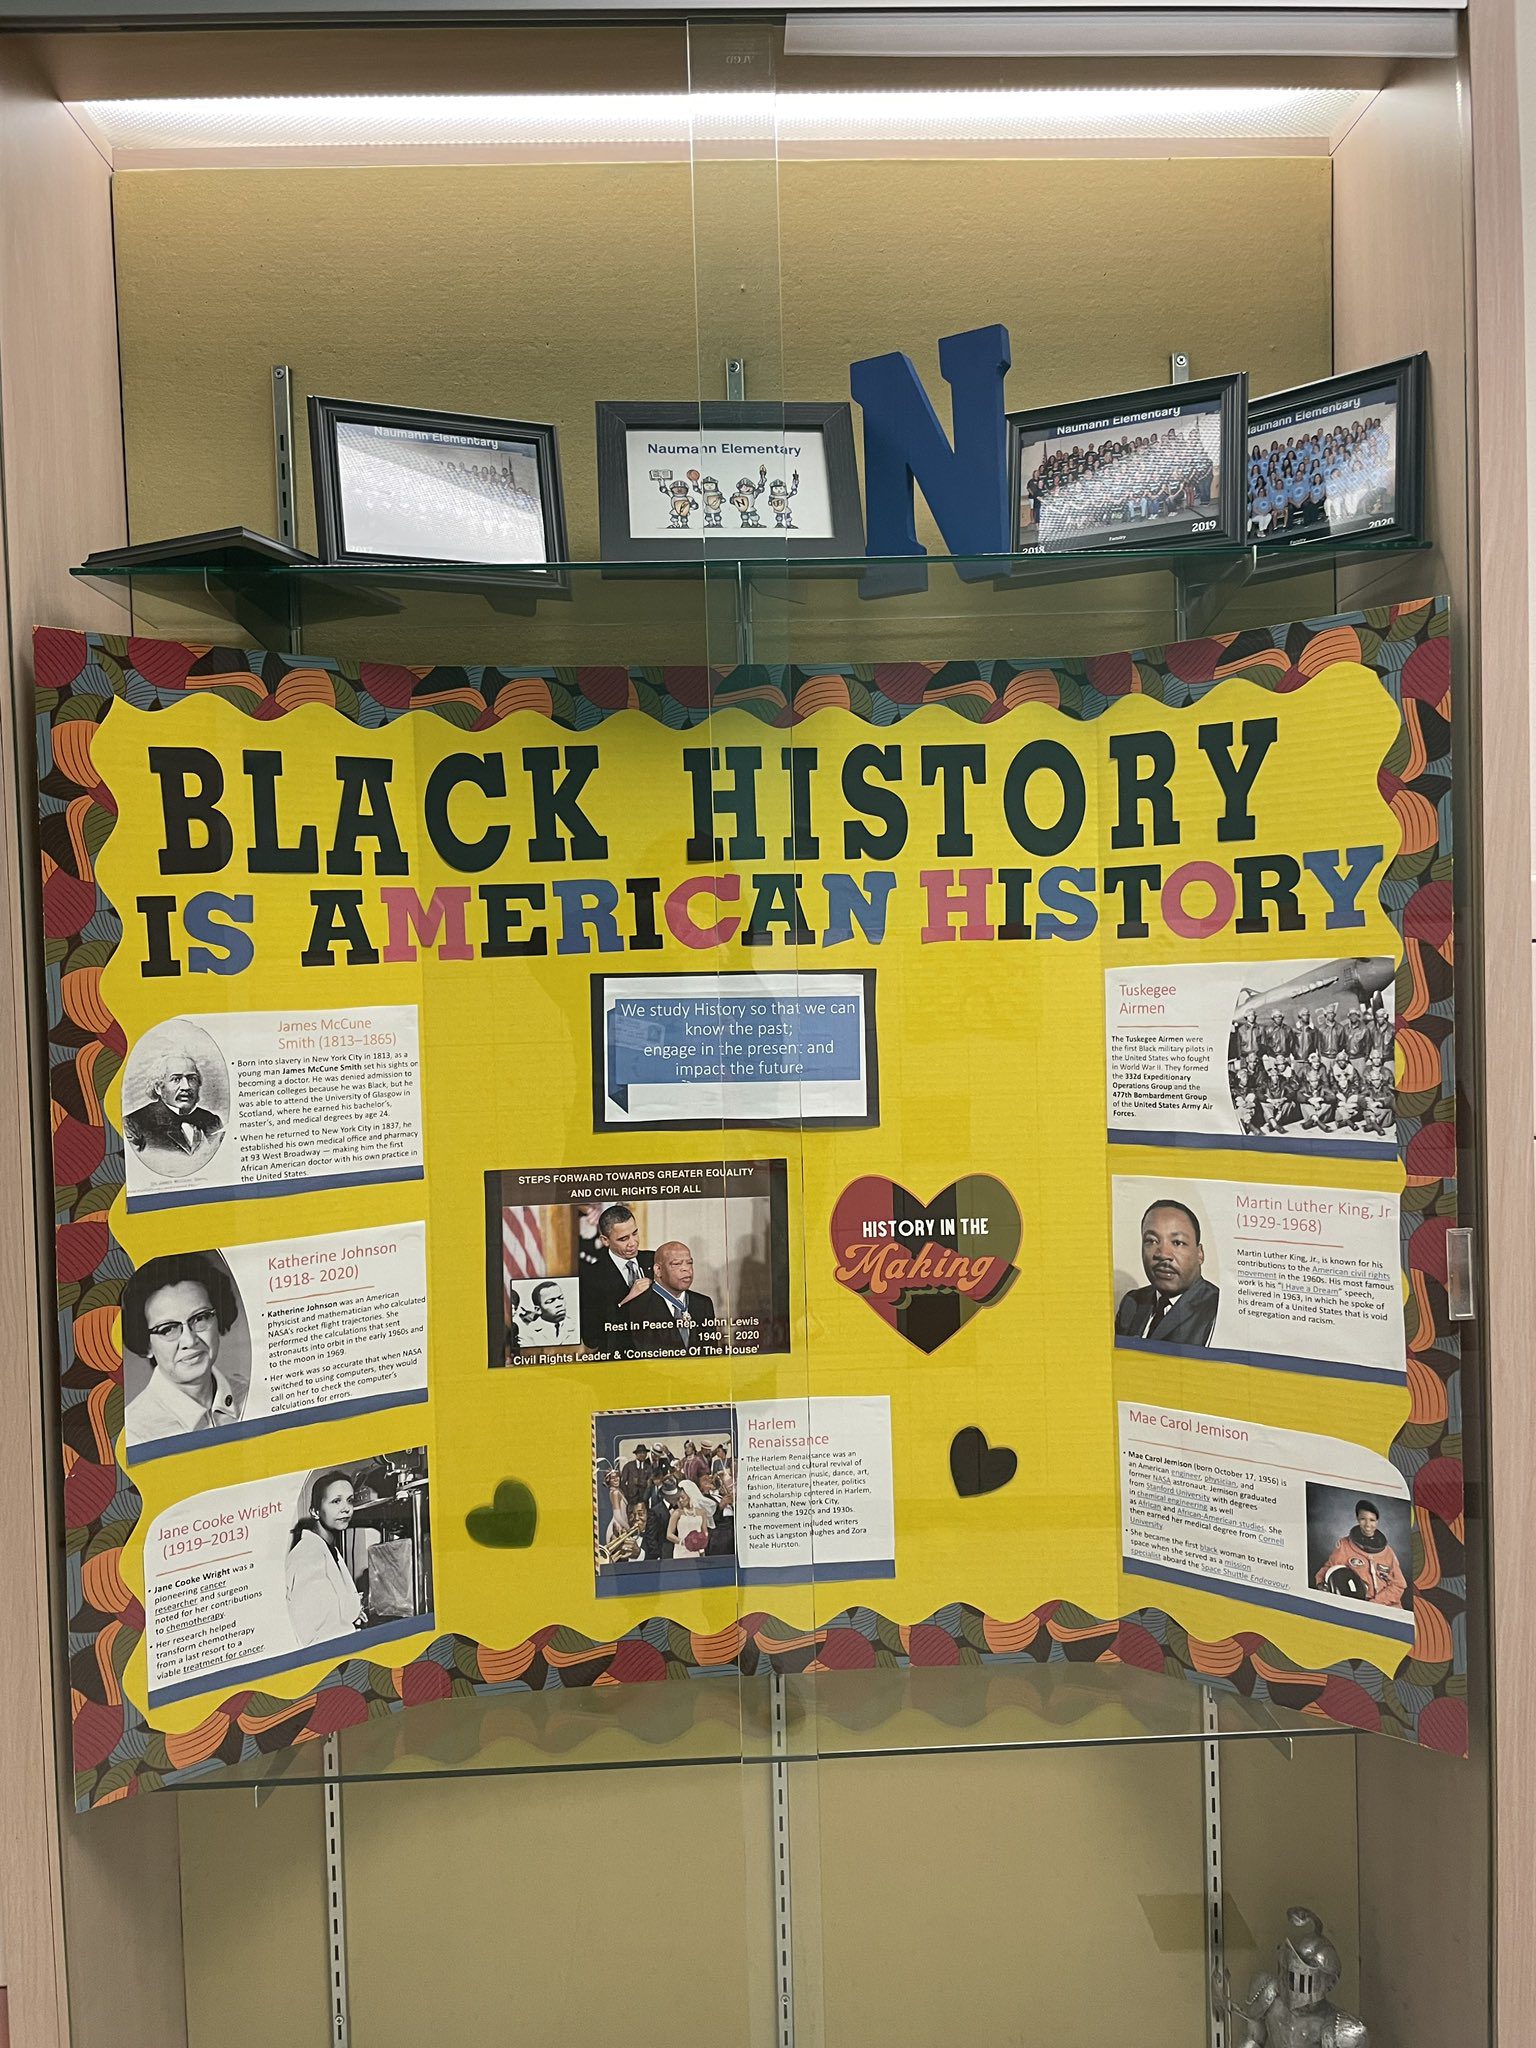 A bright yellow board has writing across it that says Black History is American History. It has photos and descriptions of events and people from Black history. (black history month bulletin board)